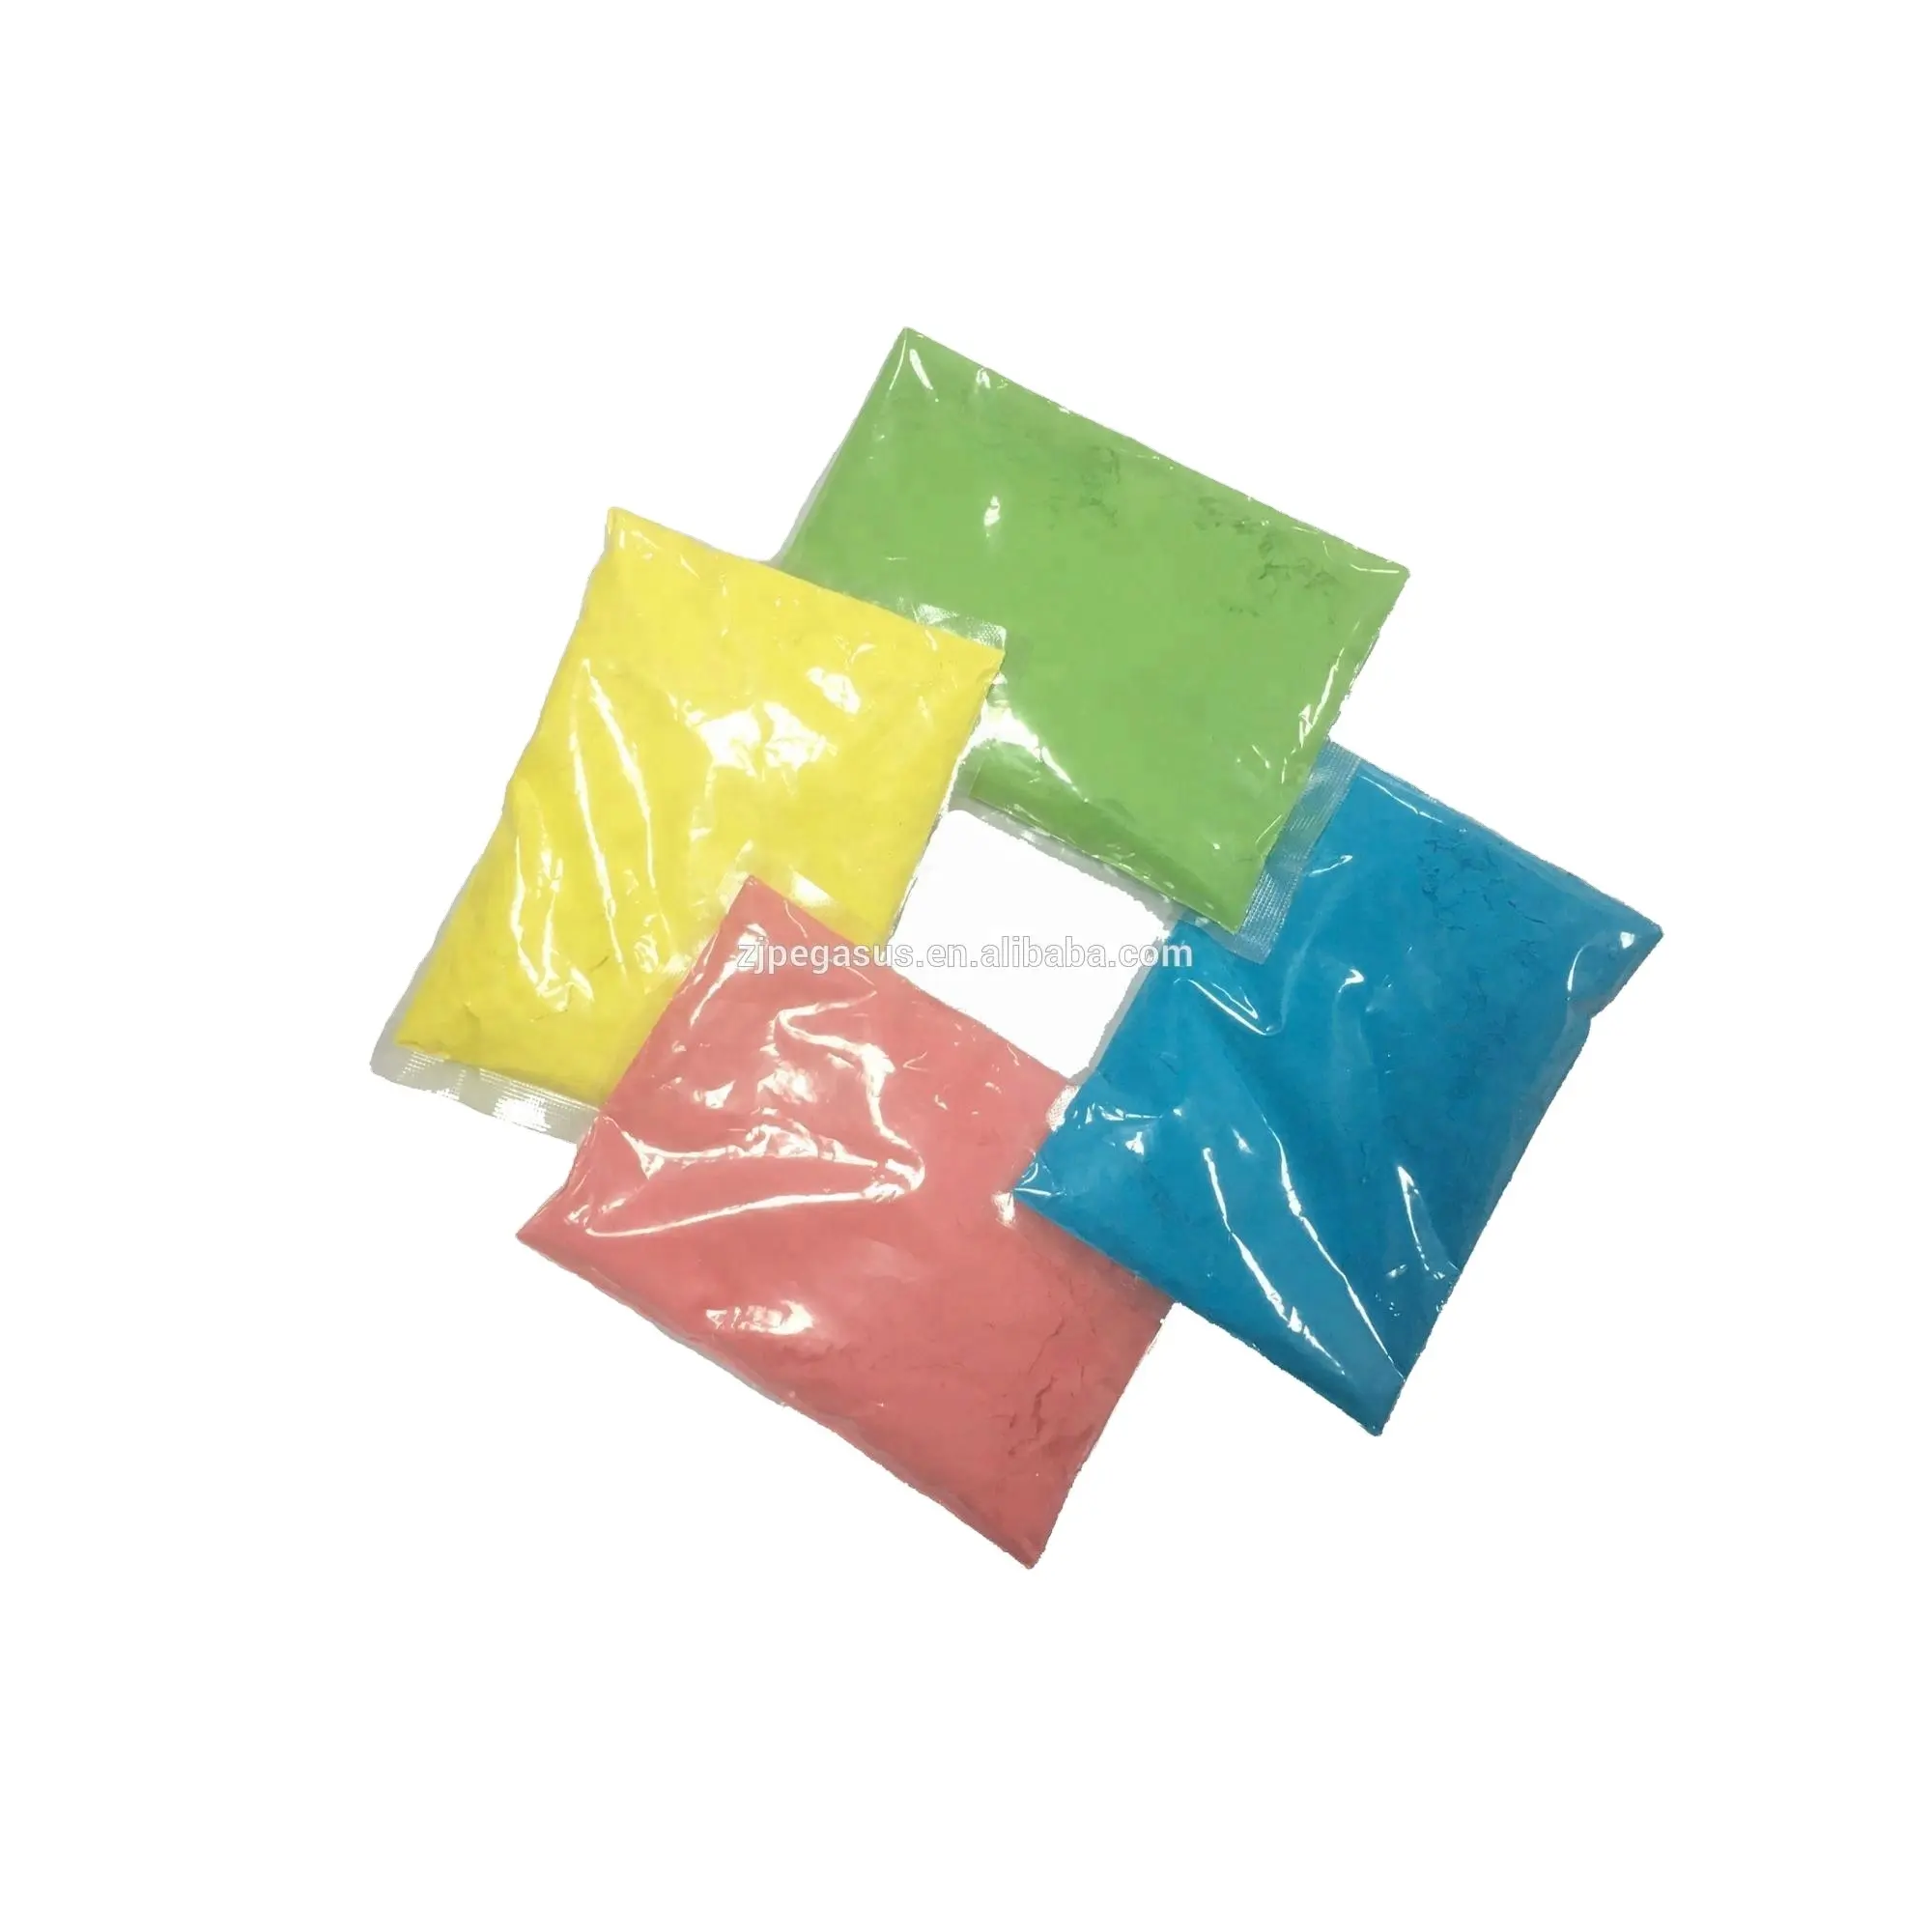 Holi colour powder for outdoor parties confetti cannon powder party popper